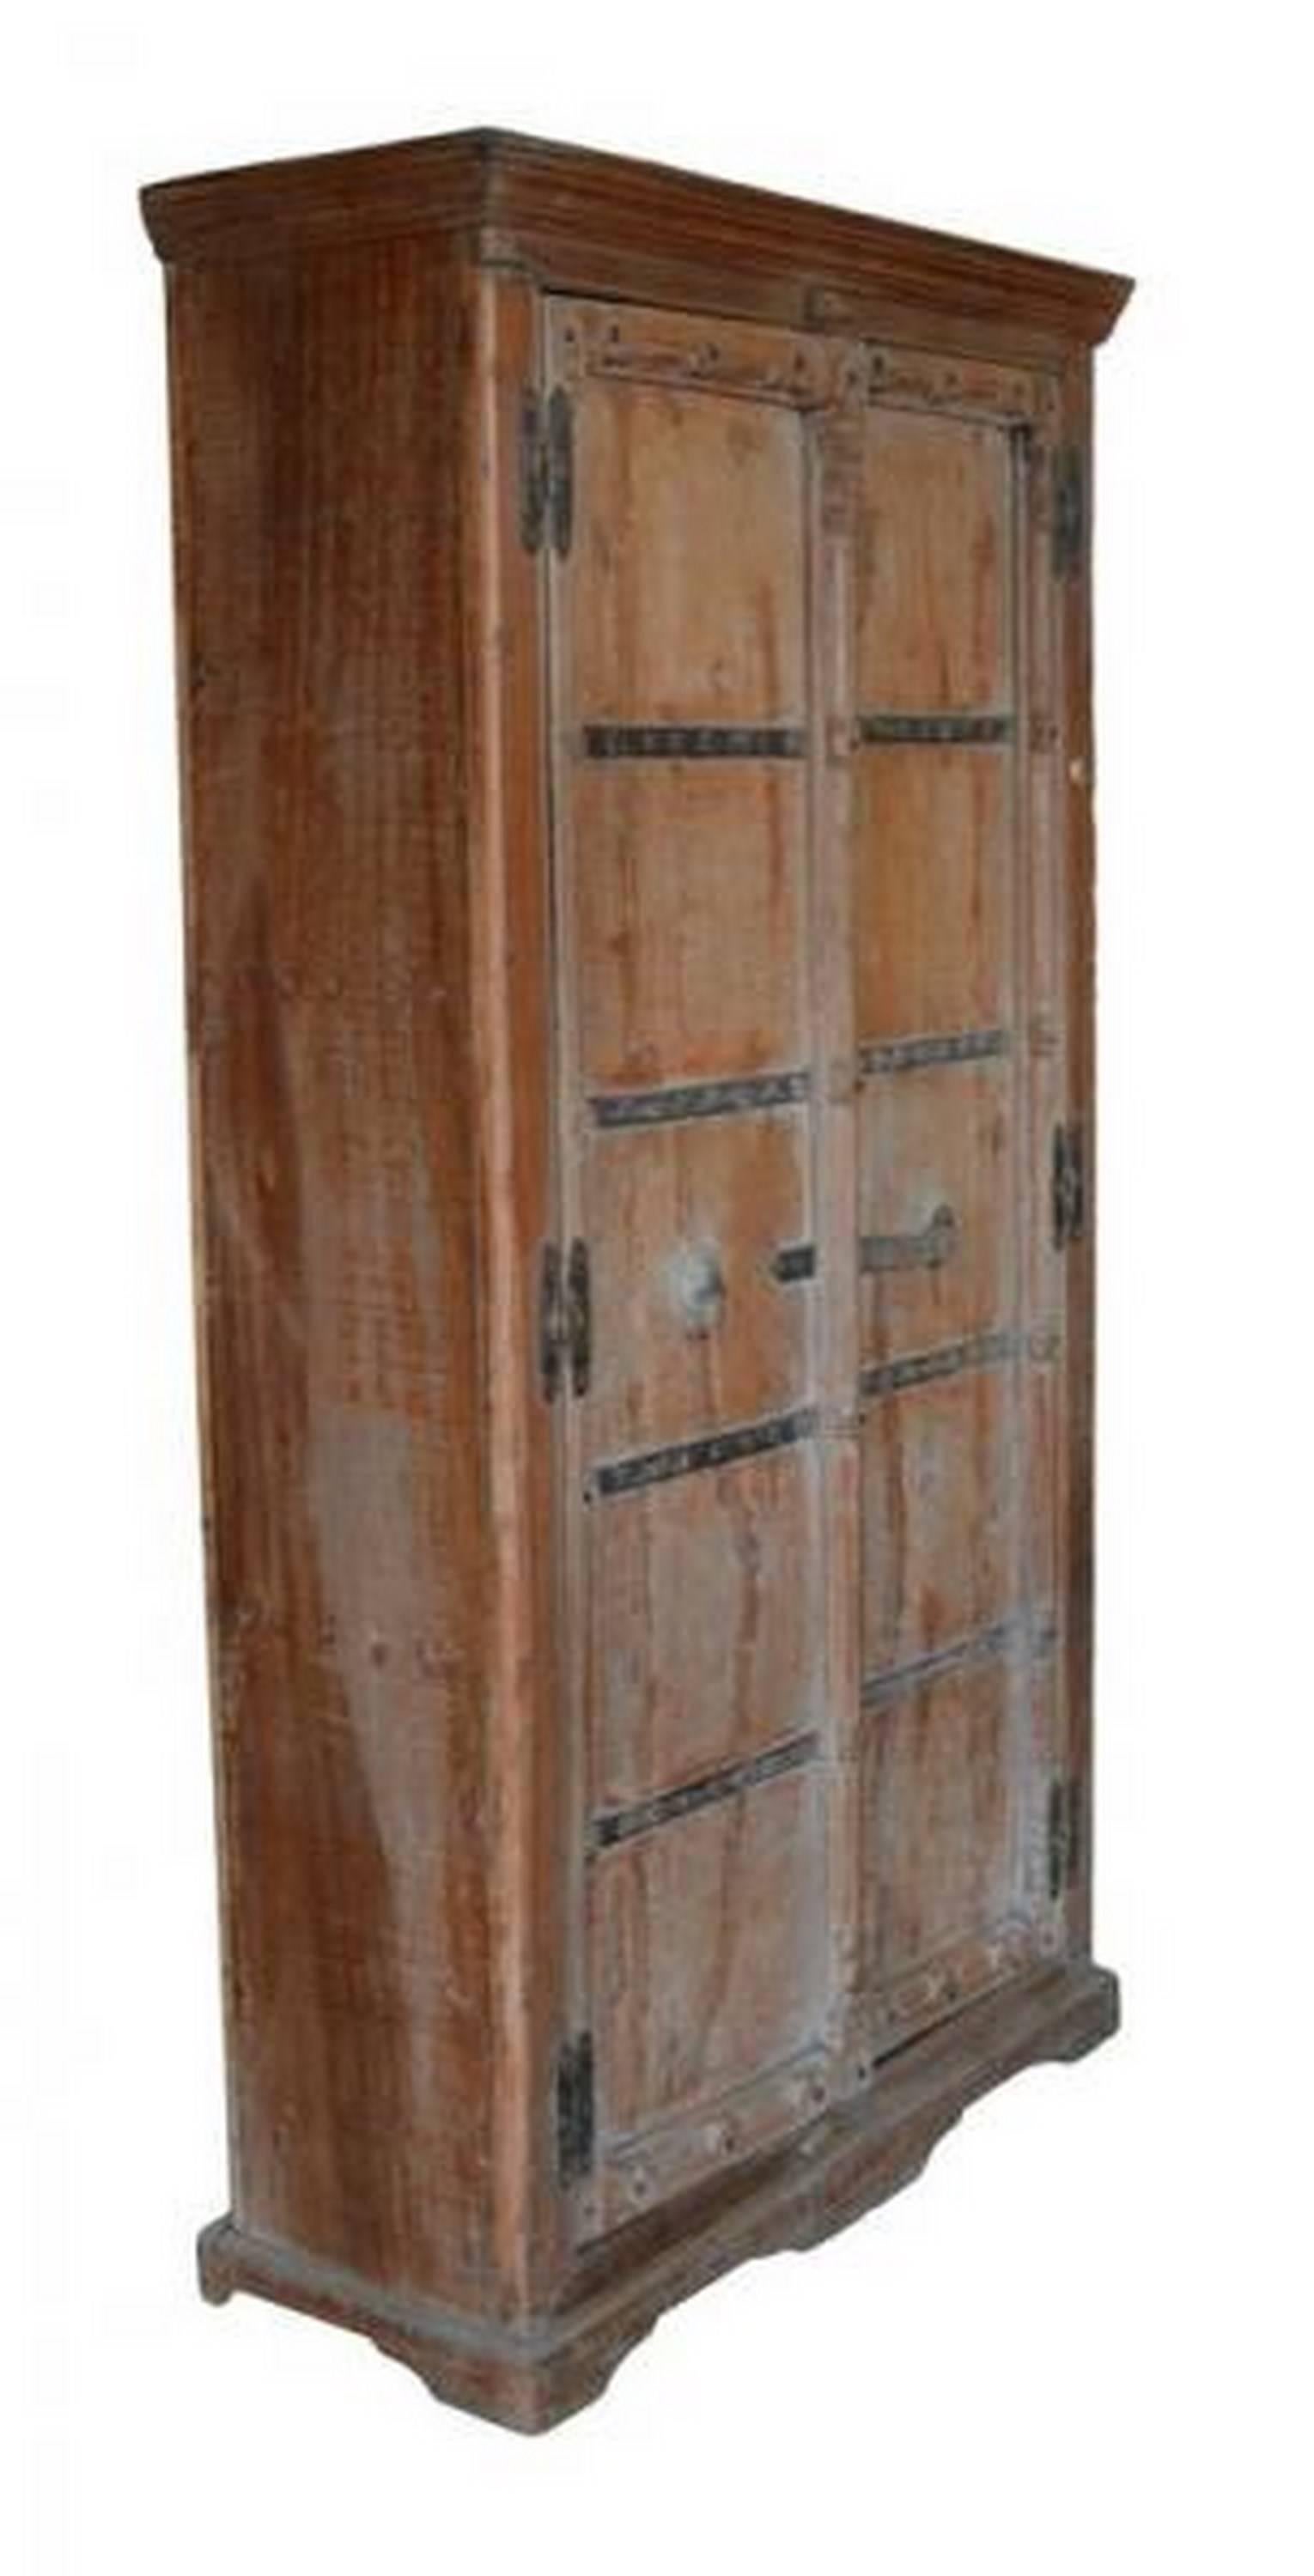 A 19th century Indian Shesham wooden two-door cabinet with iron hardware. This tall wooden cabinet from the 19th century made with Shesham wood and iron hardware comes from Gujerat in India. This cabinet features a molded cornice and a carved base.